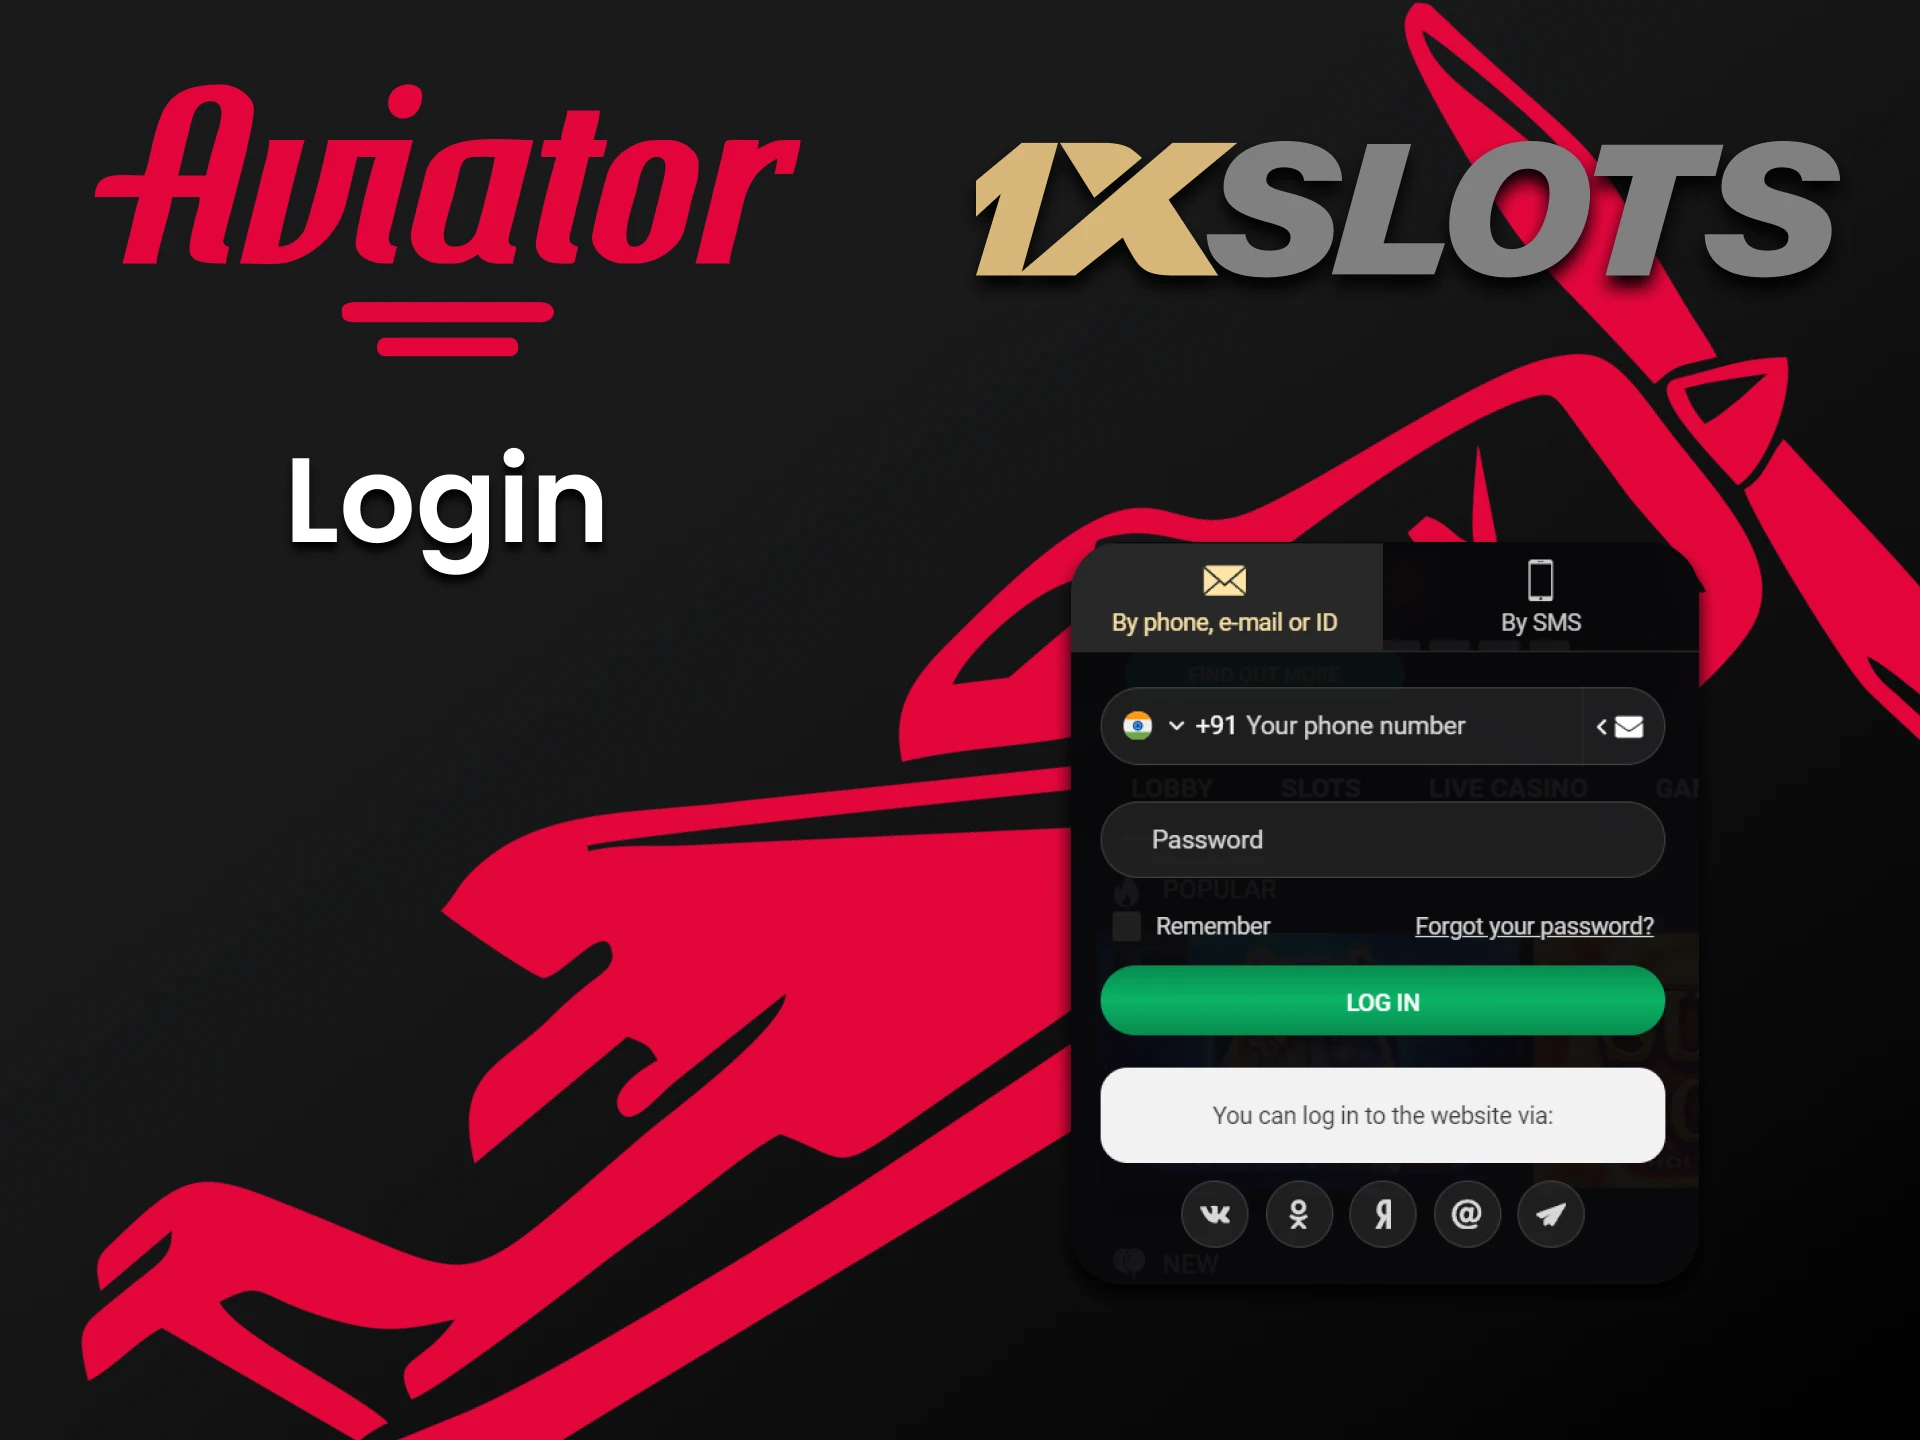 Log in to your 1xslots account and play Aviator.